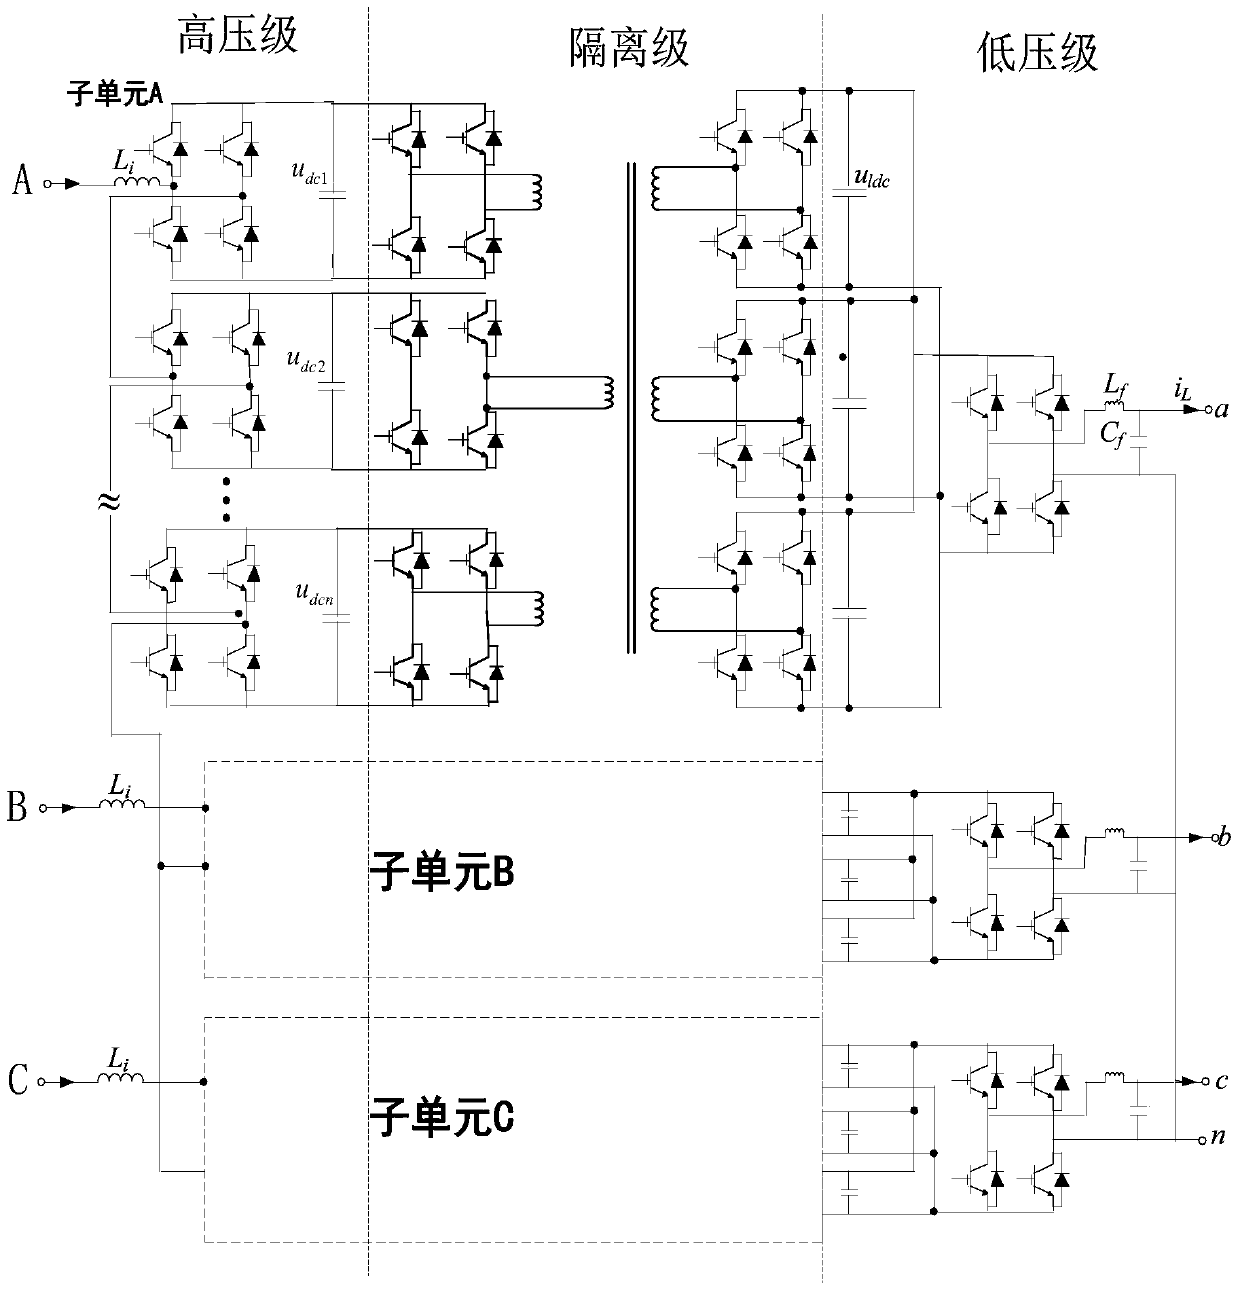 A kind of mmc-based solid-state transformer and its control method